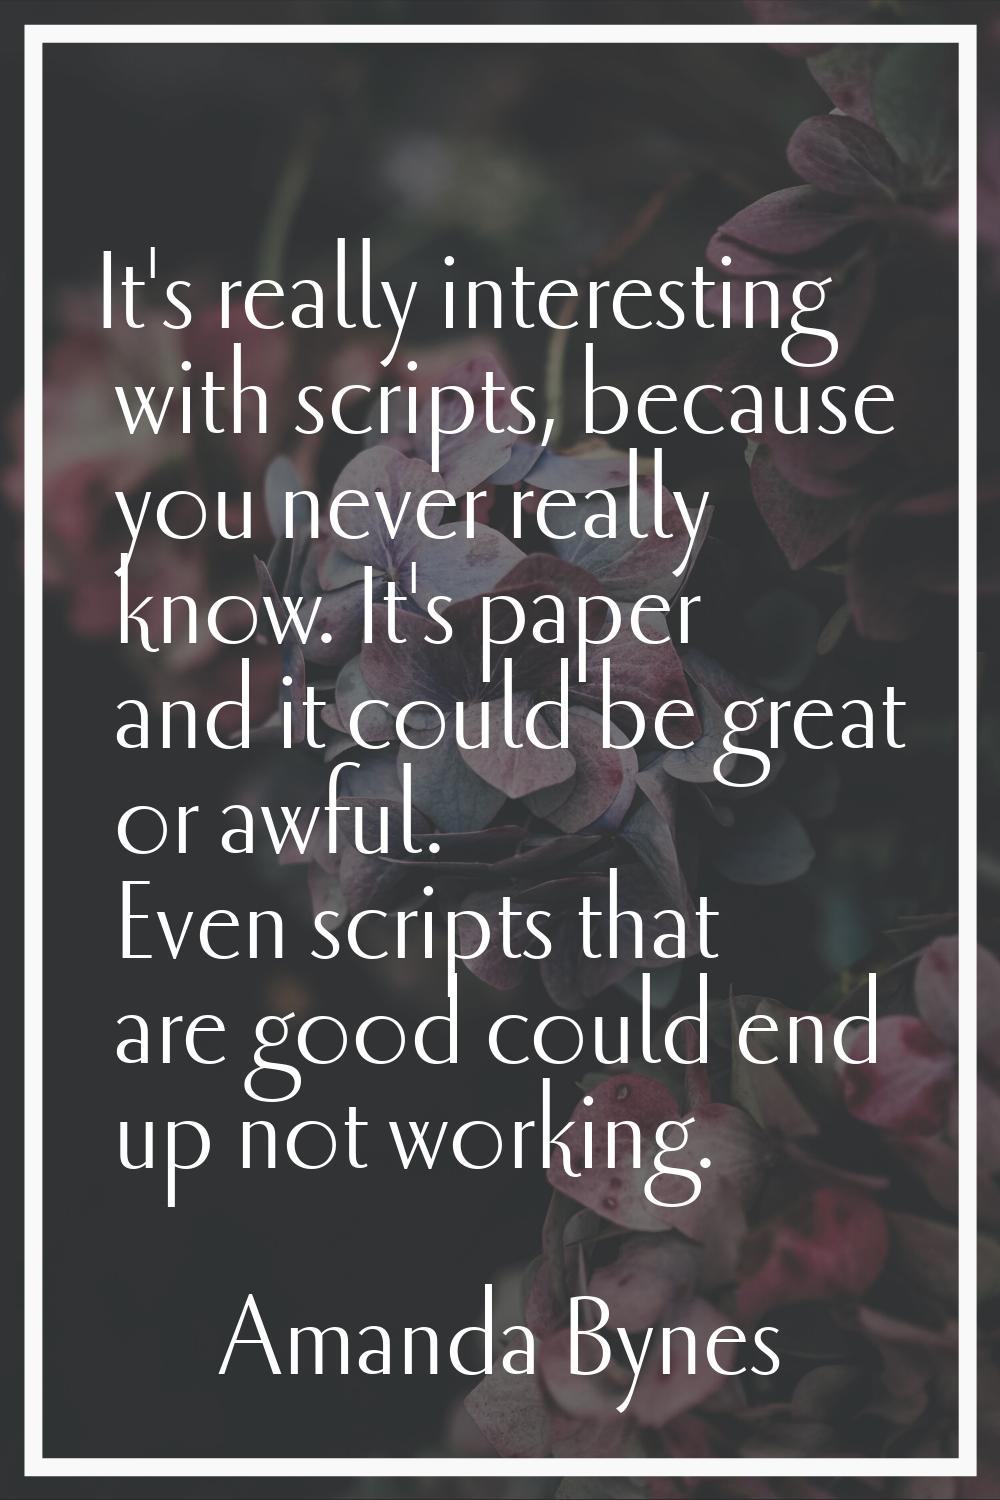 It's really interesting with scripts, because you never really know. It's paper and it could be gre